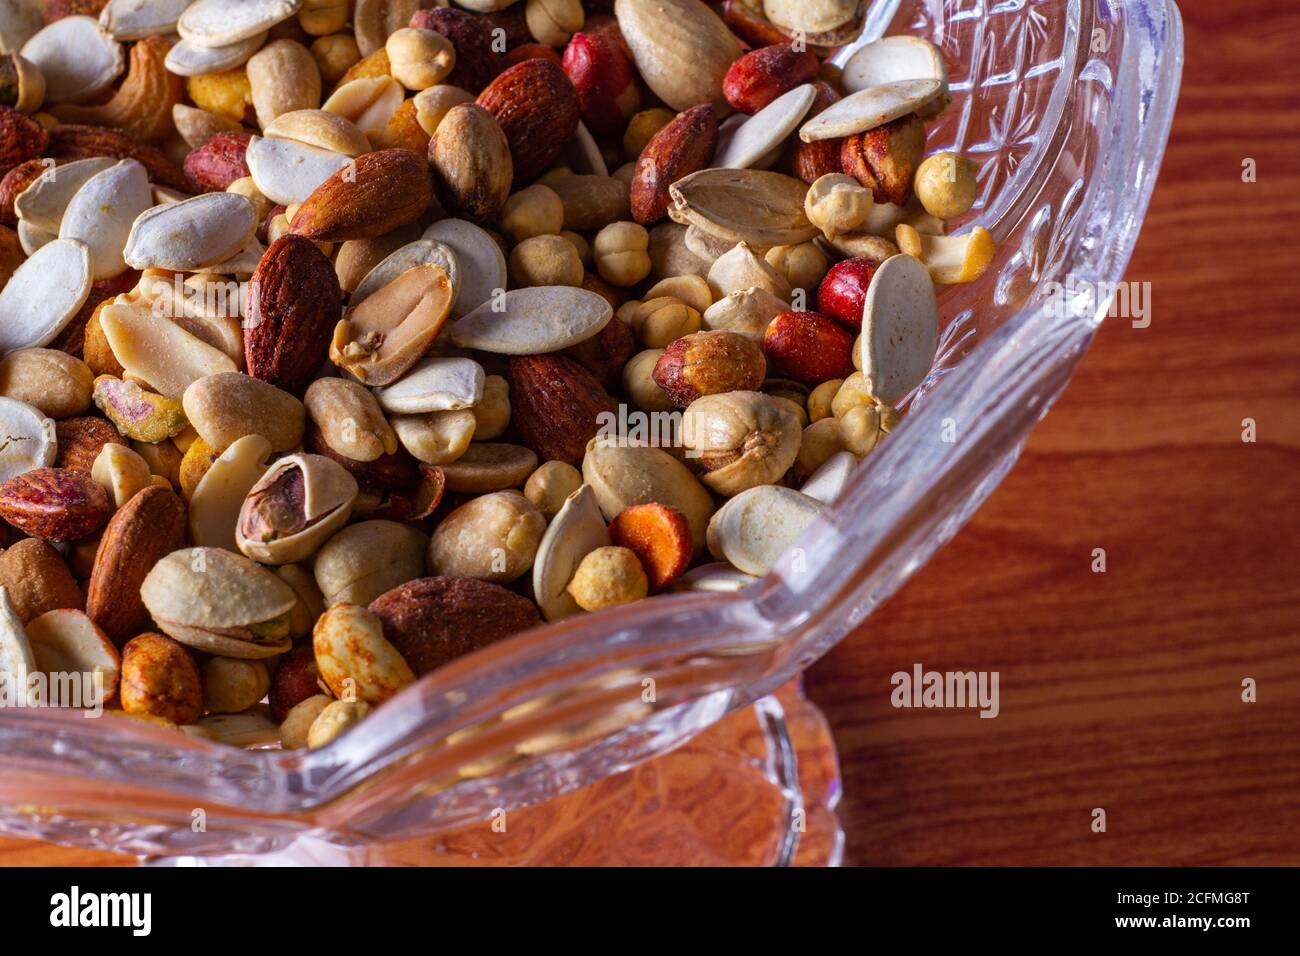 Corner closeup shot of dry fruits on a table Stock Photo